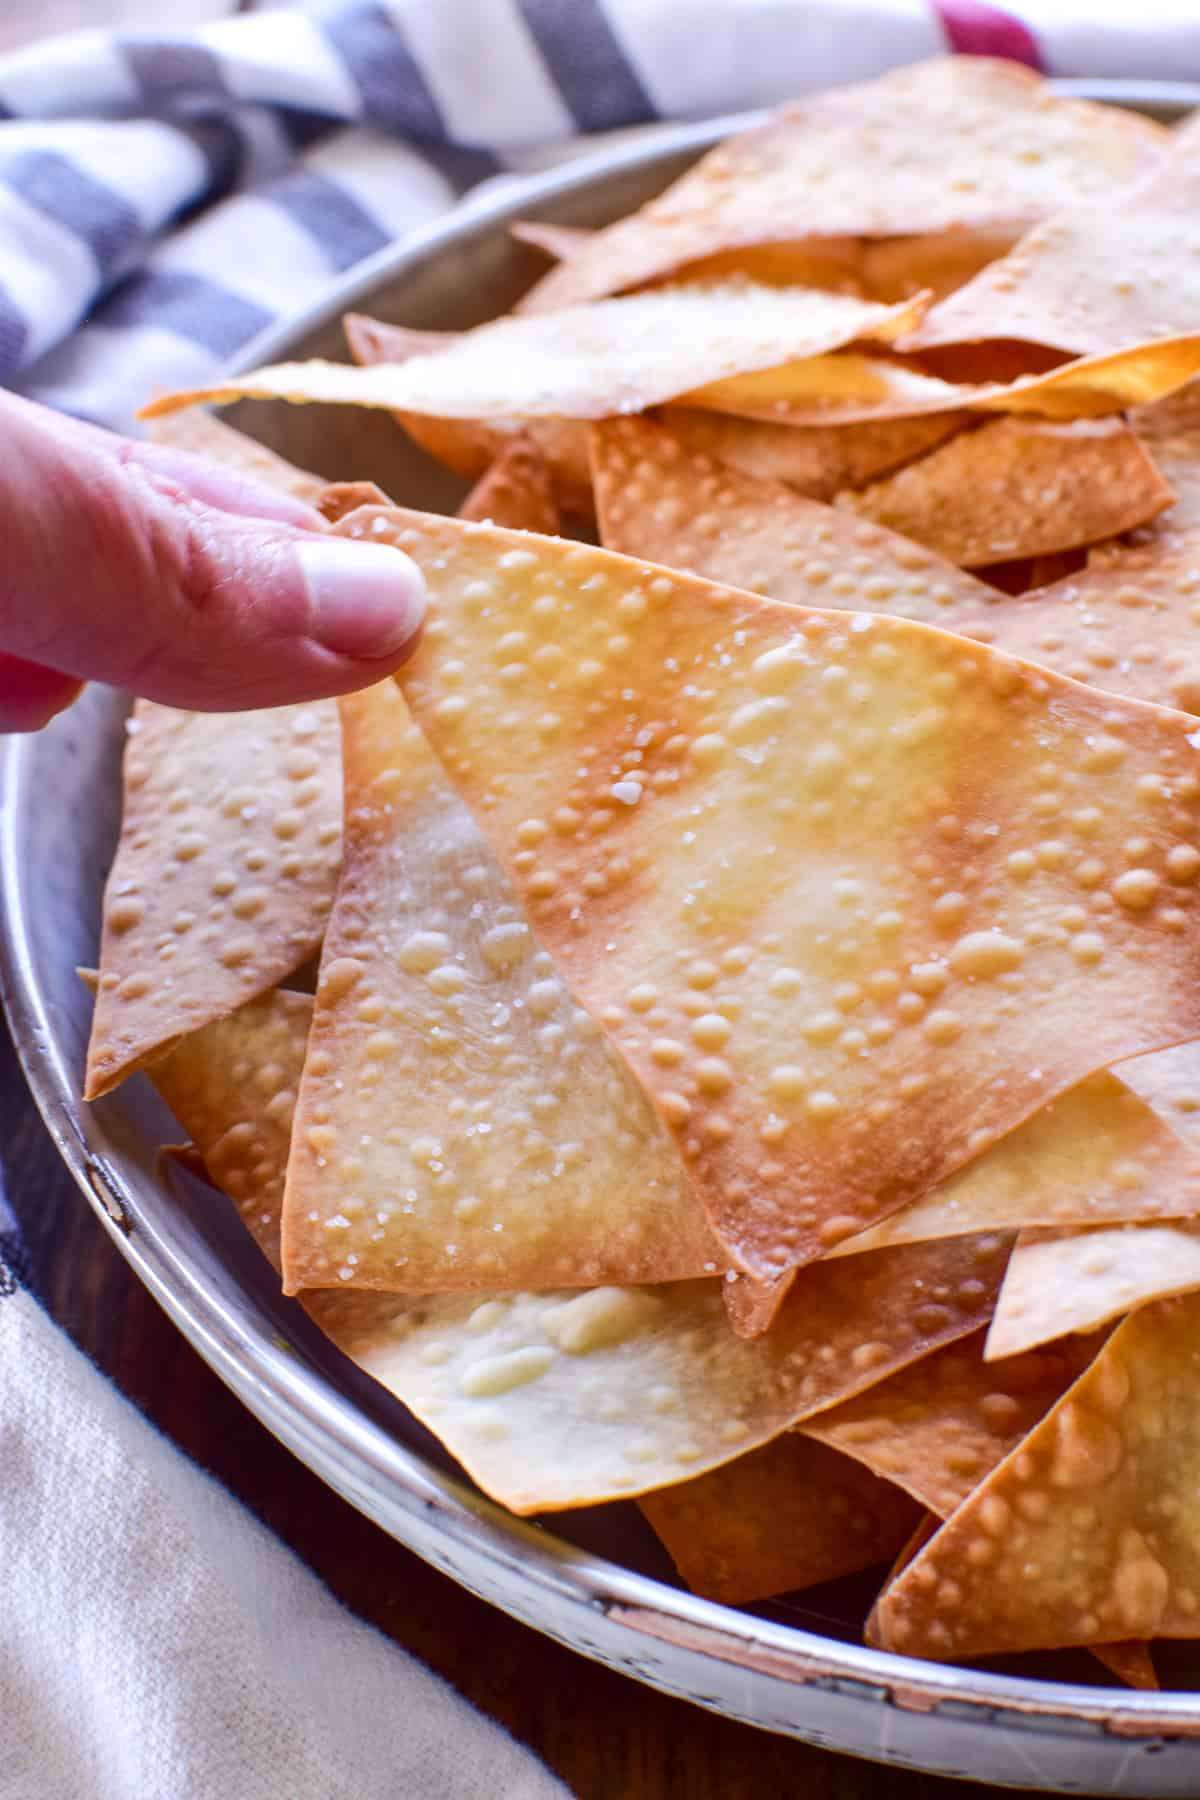 Photo of hand grabbing a Baked Wonton Chip from a bowl